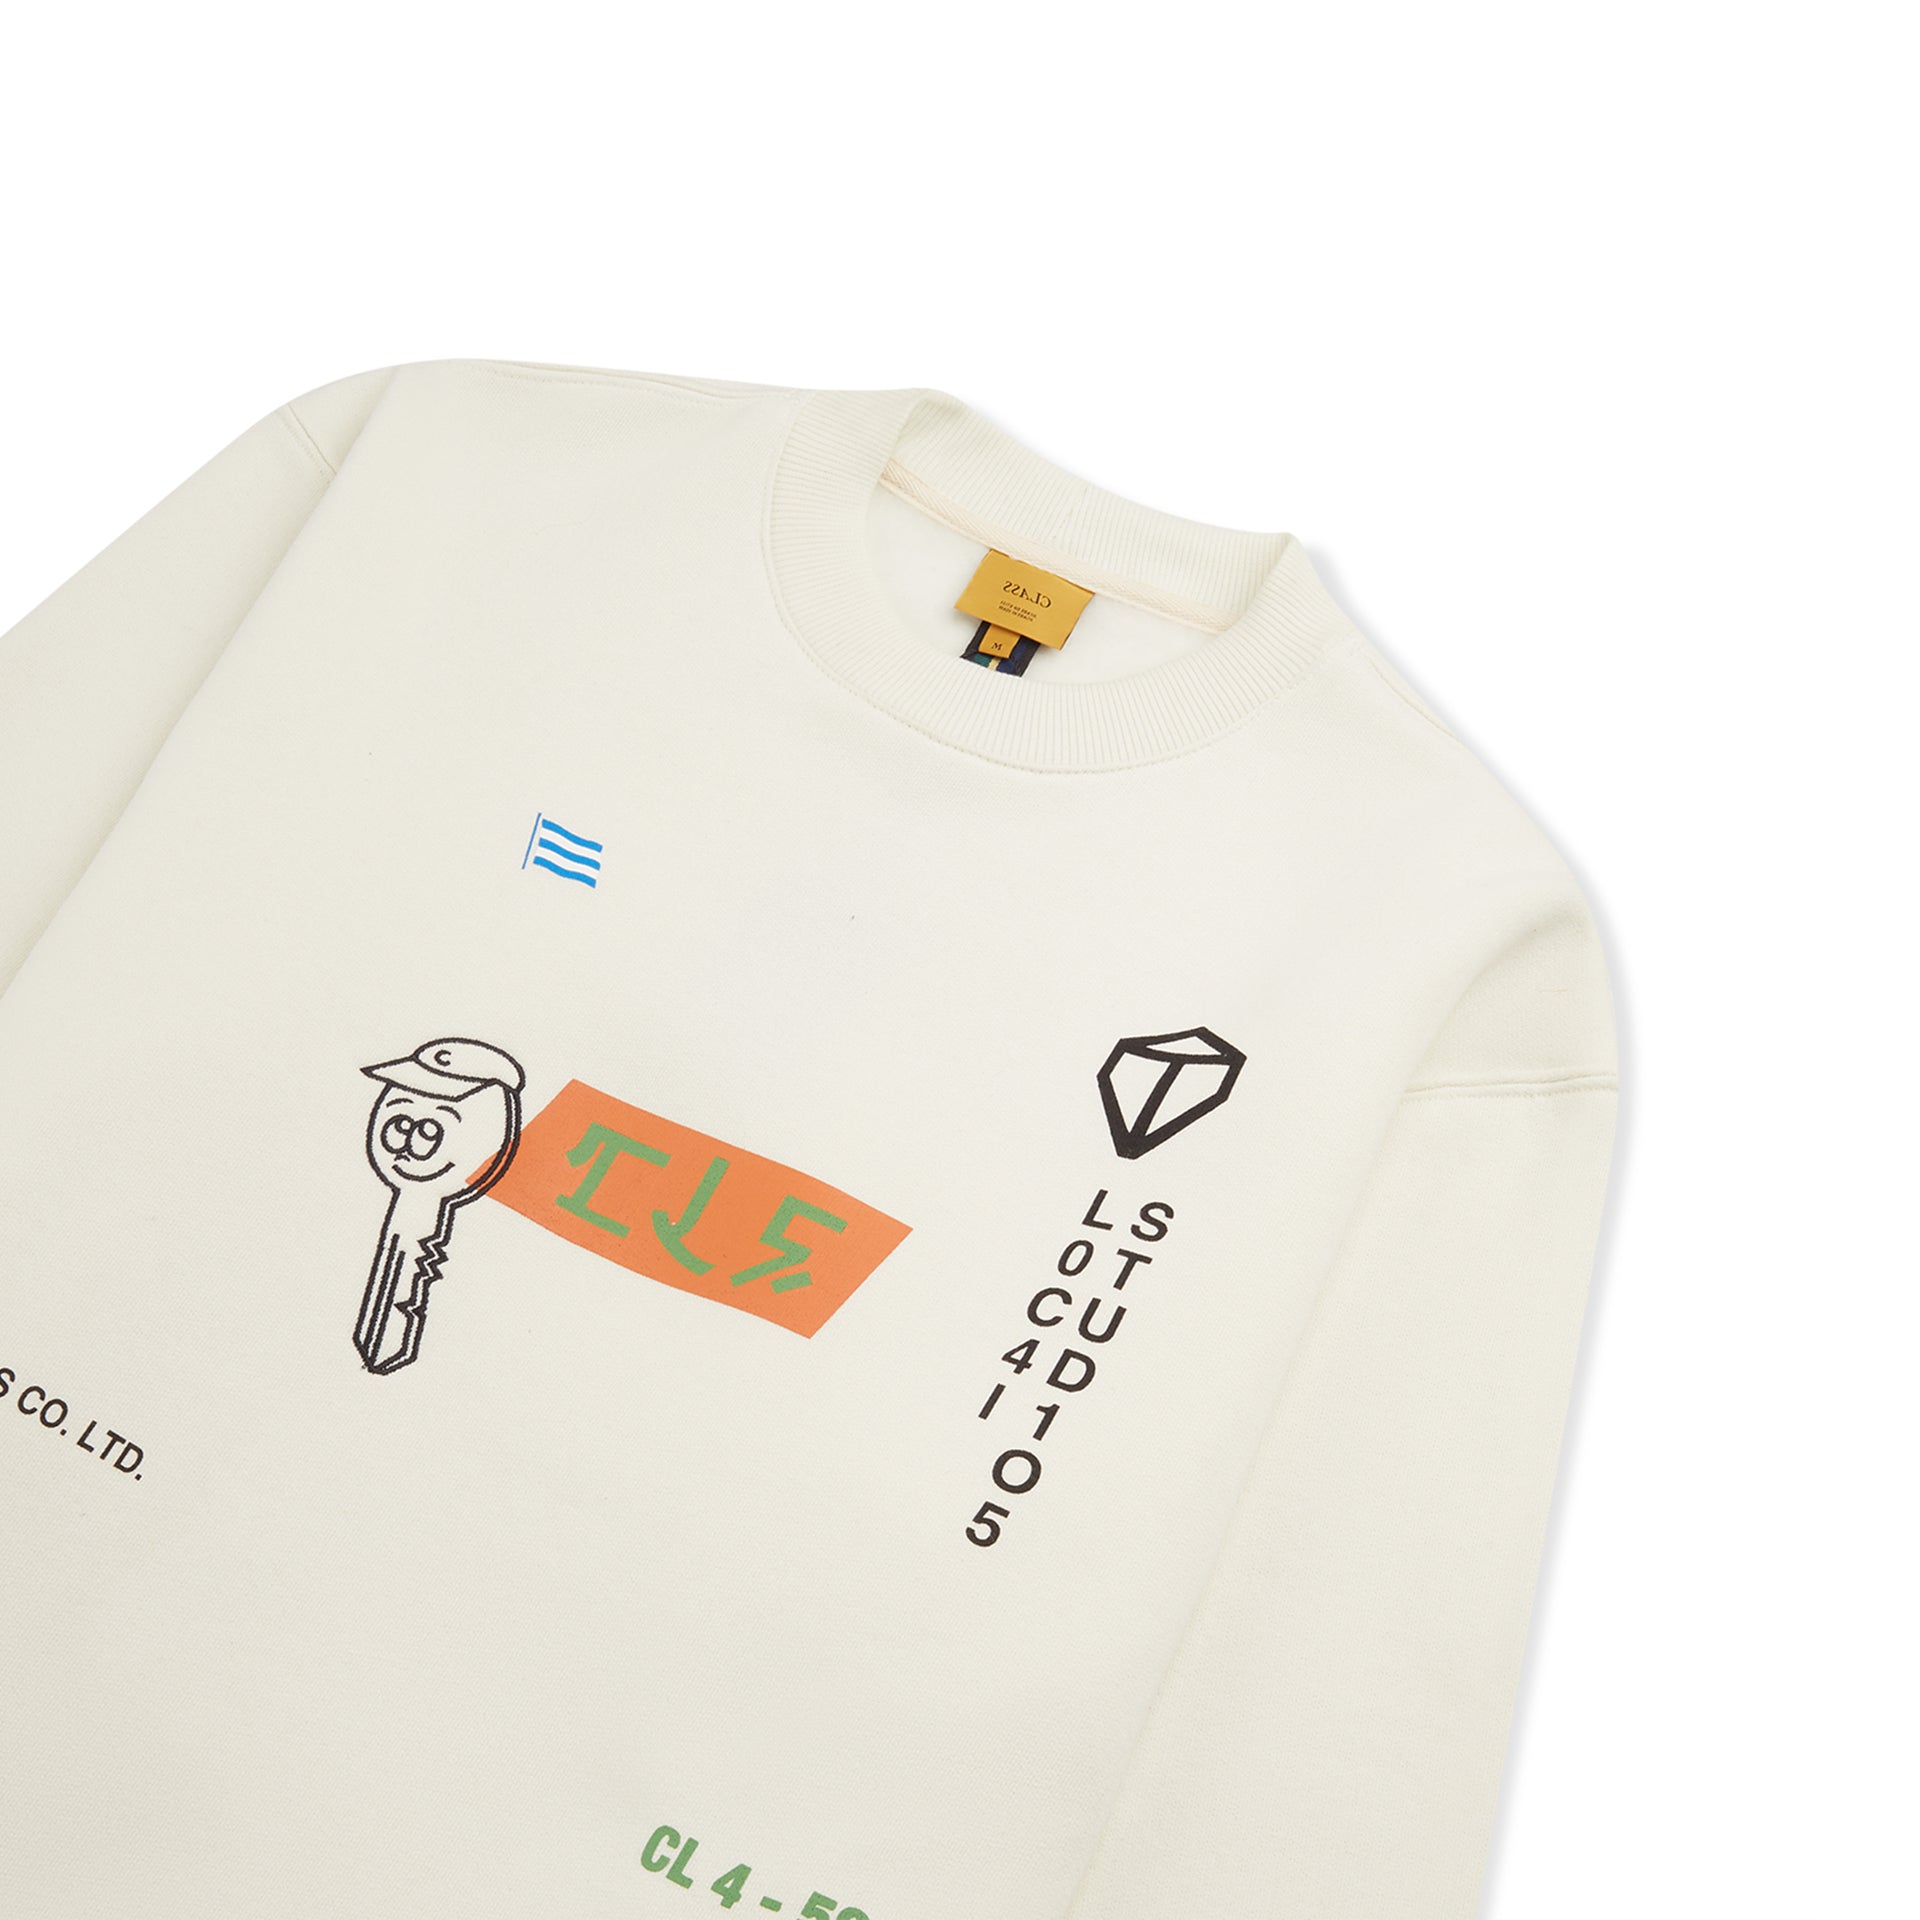 Crewneck Class Container Off White